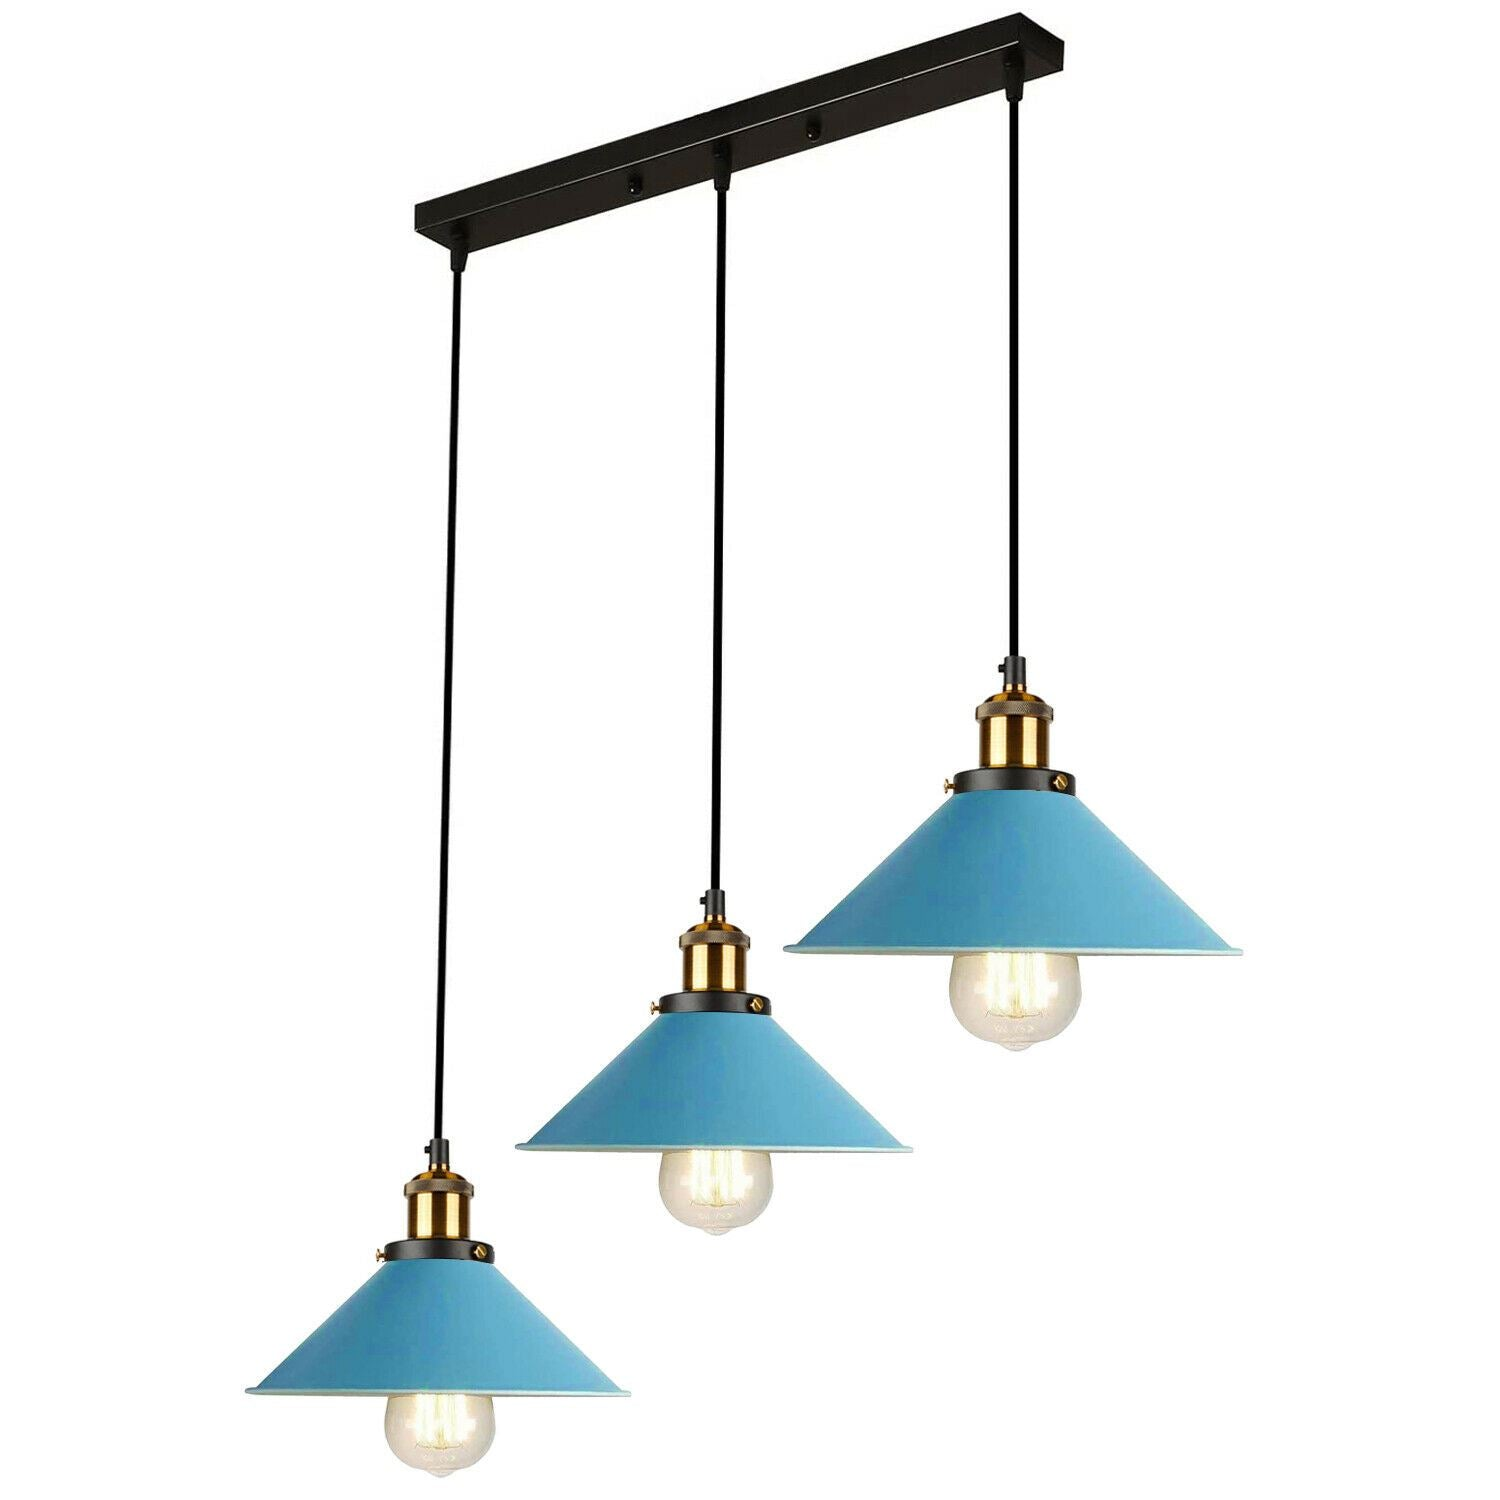 LEDSONE Industrial Vintage Pendant Light with 3 Head Cones